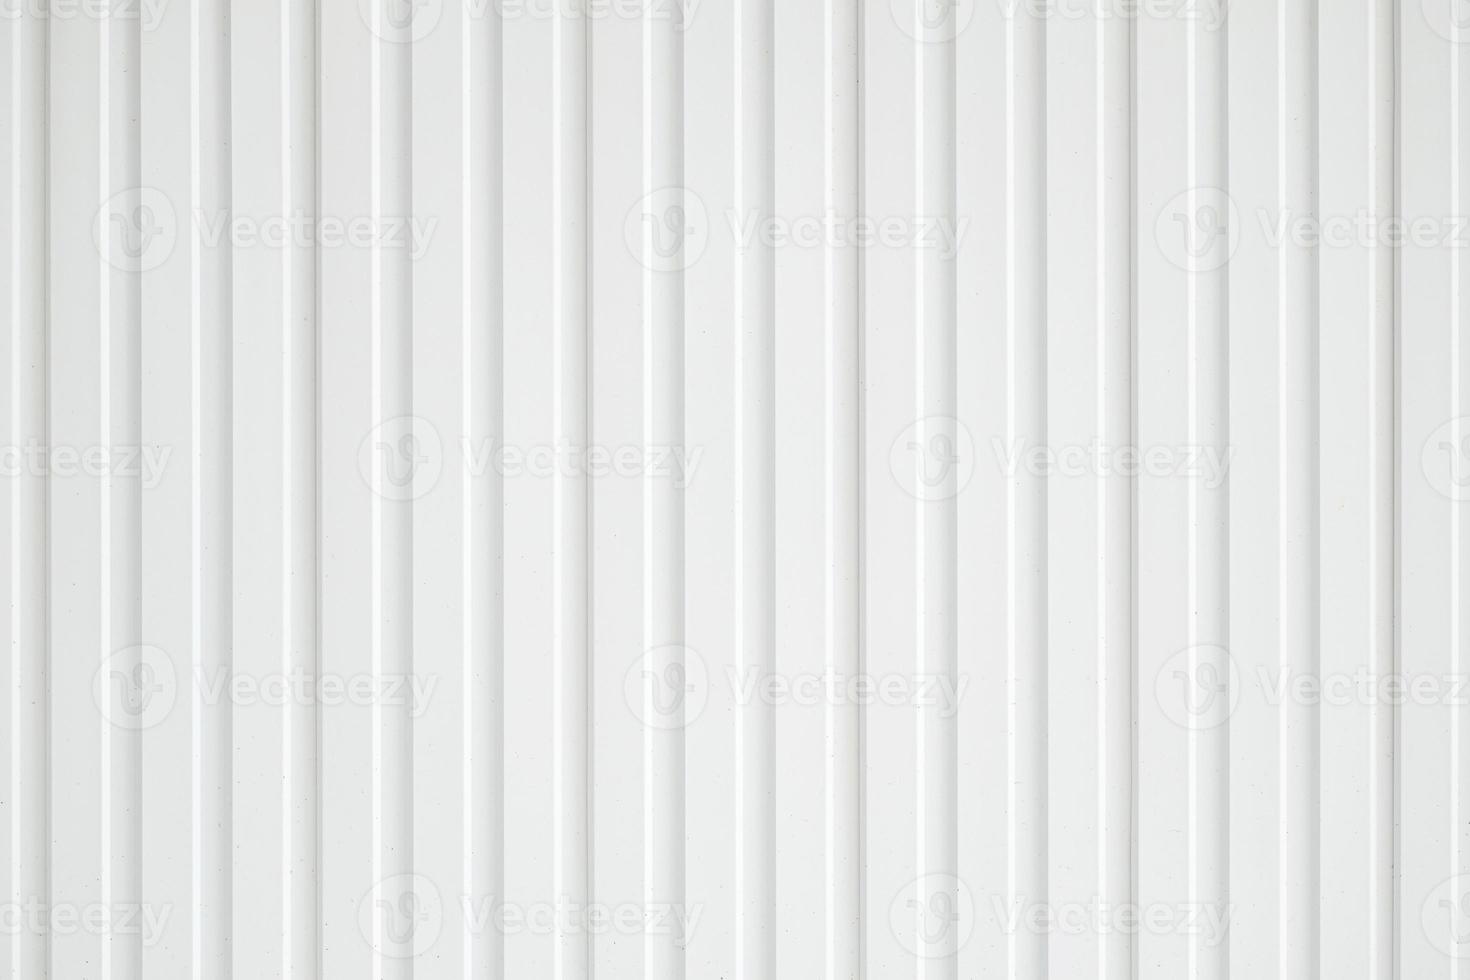 Seamless Aluminum wall pattern. Wall panels texture. Galvanized steel wall plate. Corrugated metal profiled panel. Vertical lines photo